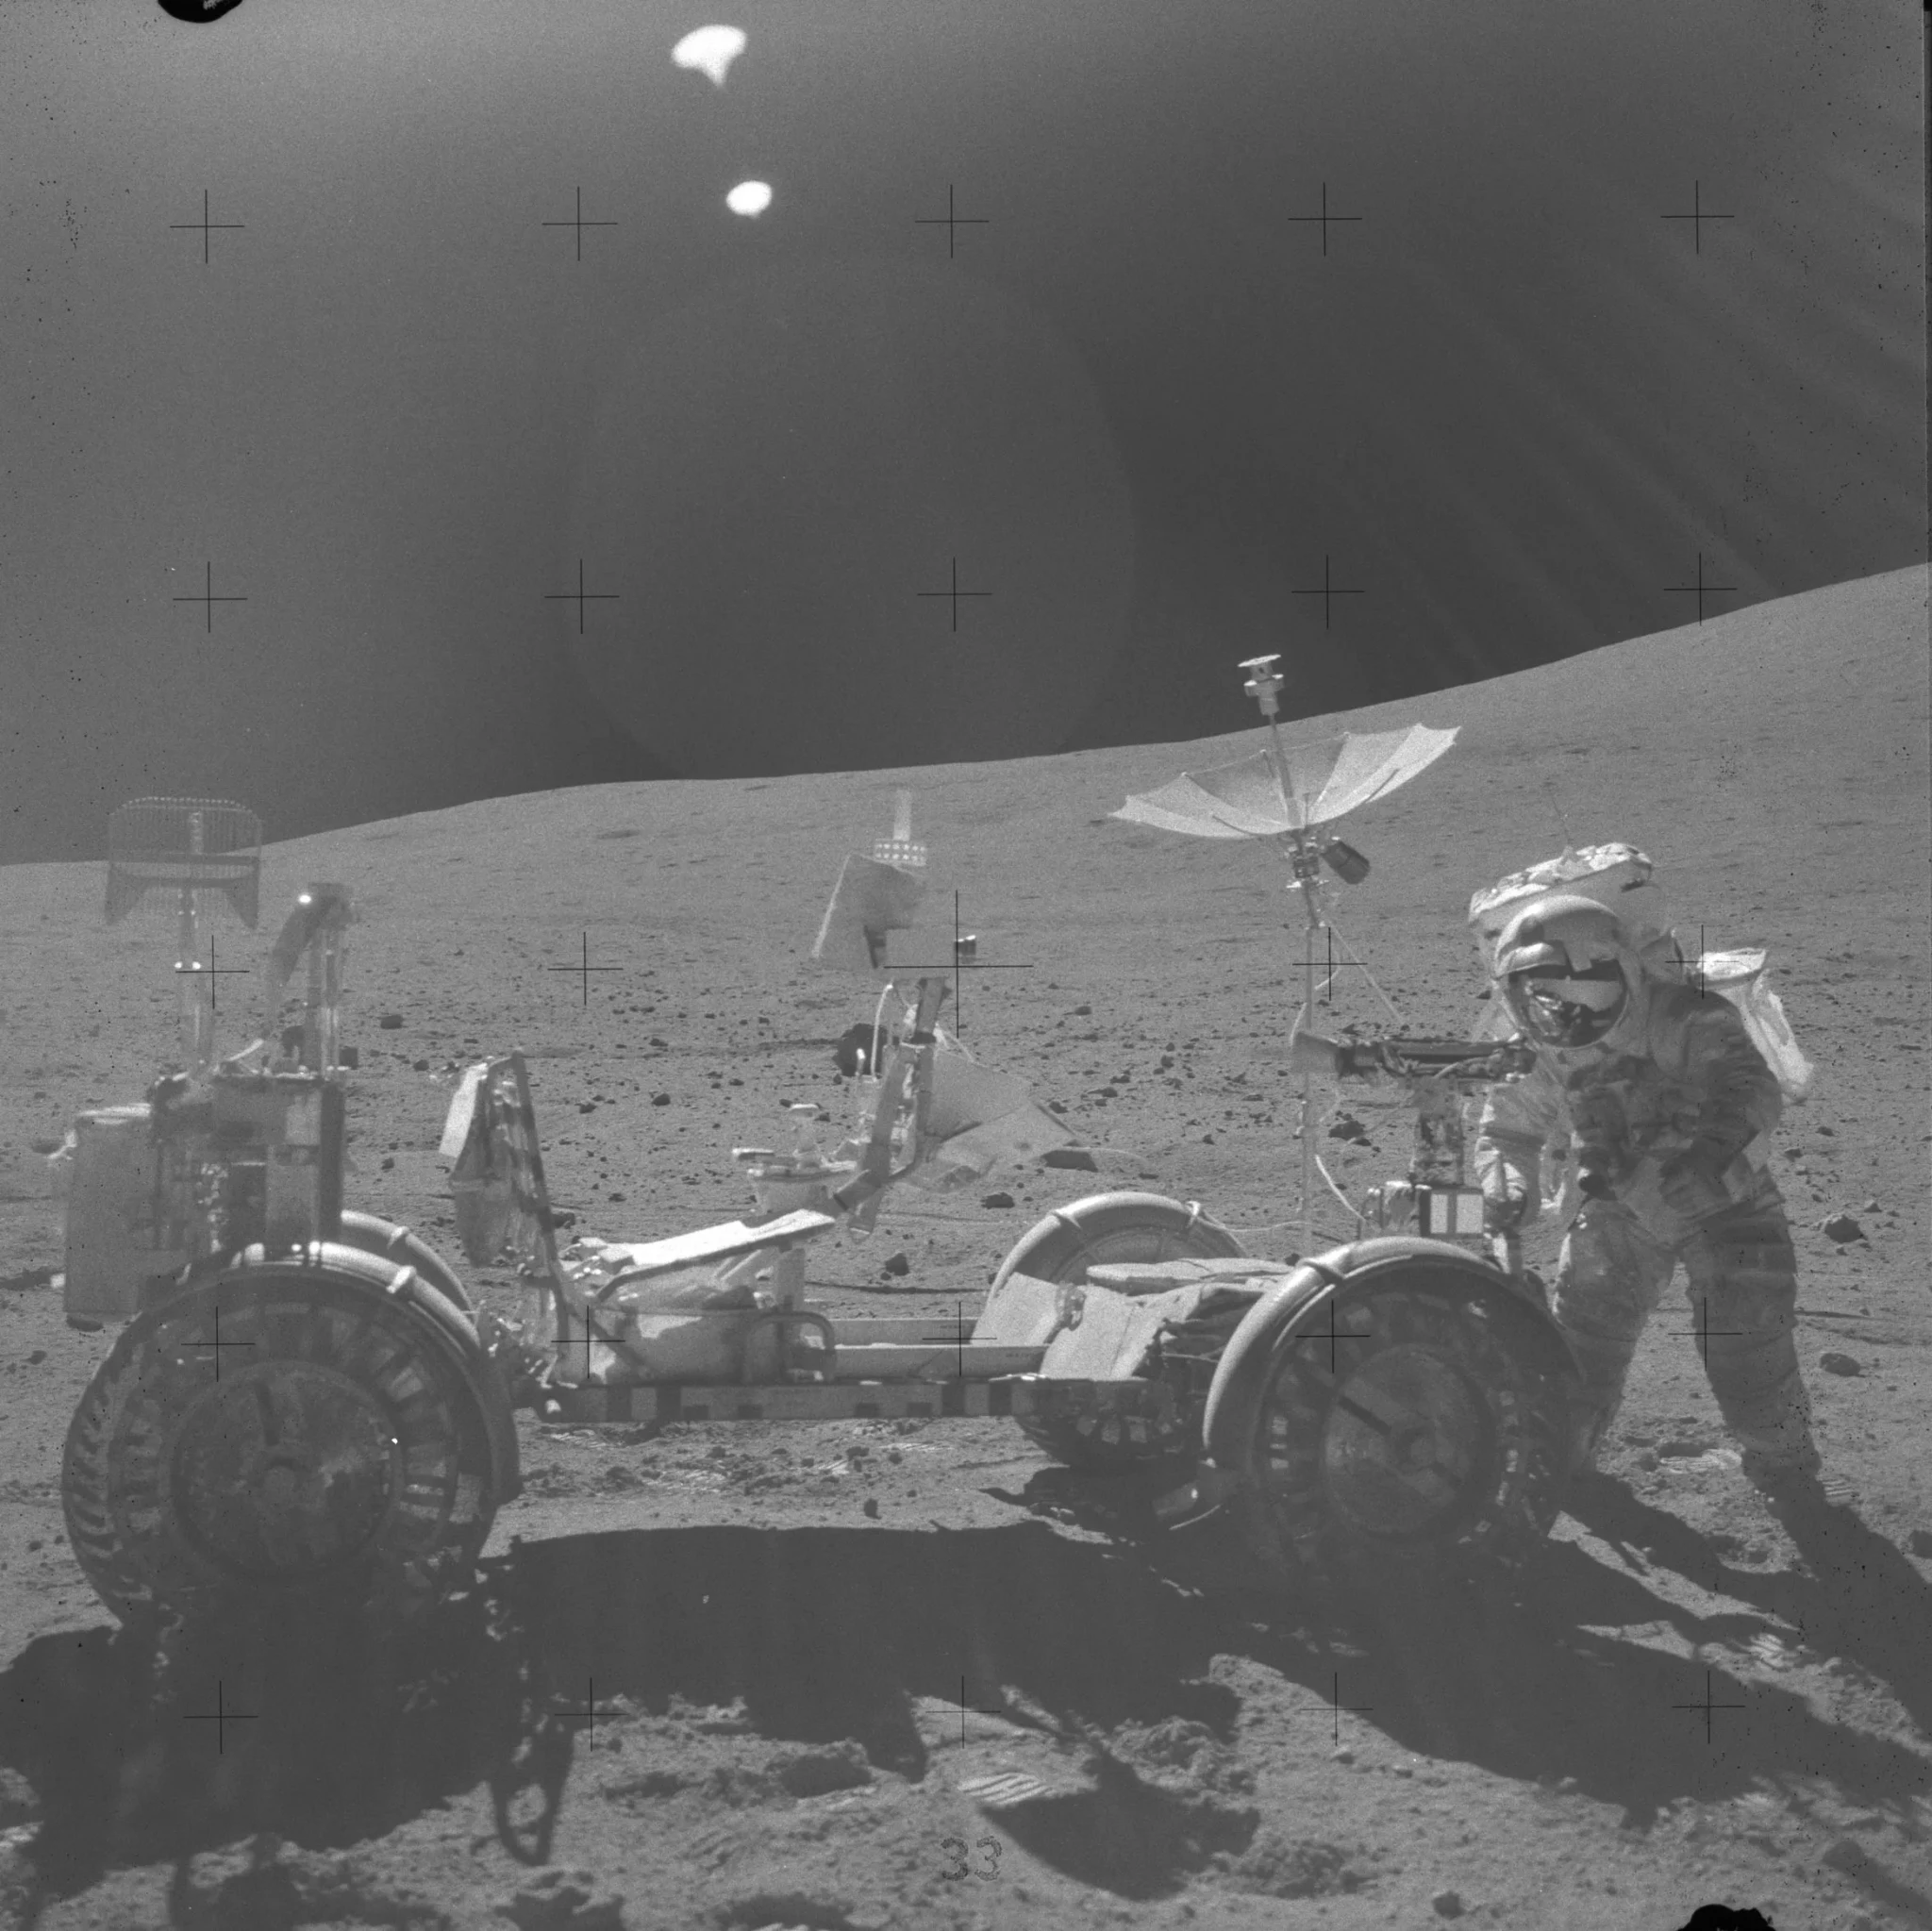 A side-profile photo of the lunar rover from Apollo 16. John Young stands at the front of the vehicle, to the right of the photo frame. He is using the lunar dust brush to clean regolith off of the vehicle. https://www.nasa.gov/history/alsj/picture.html